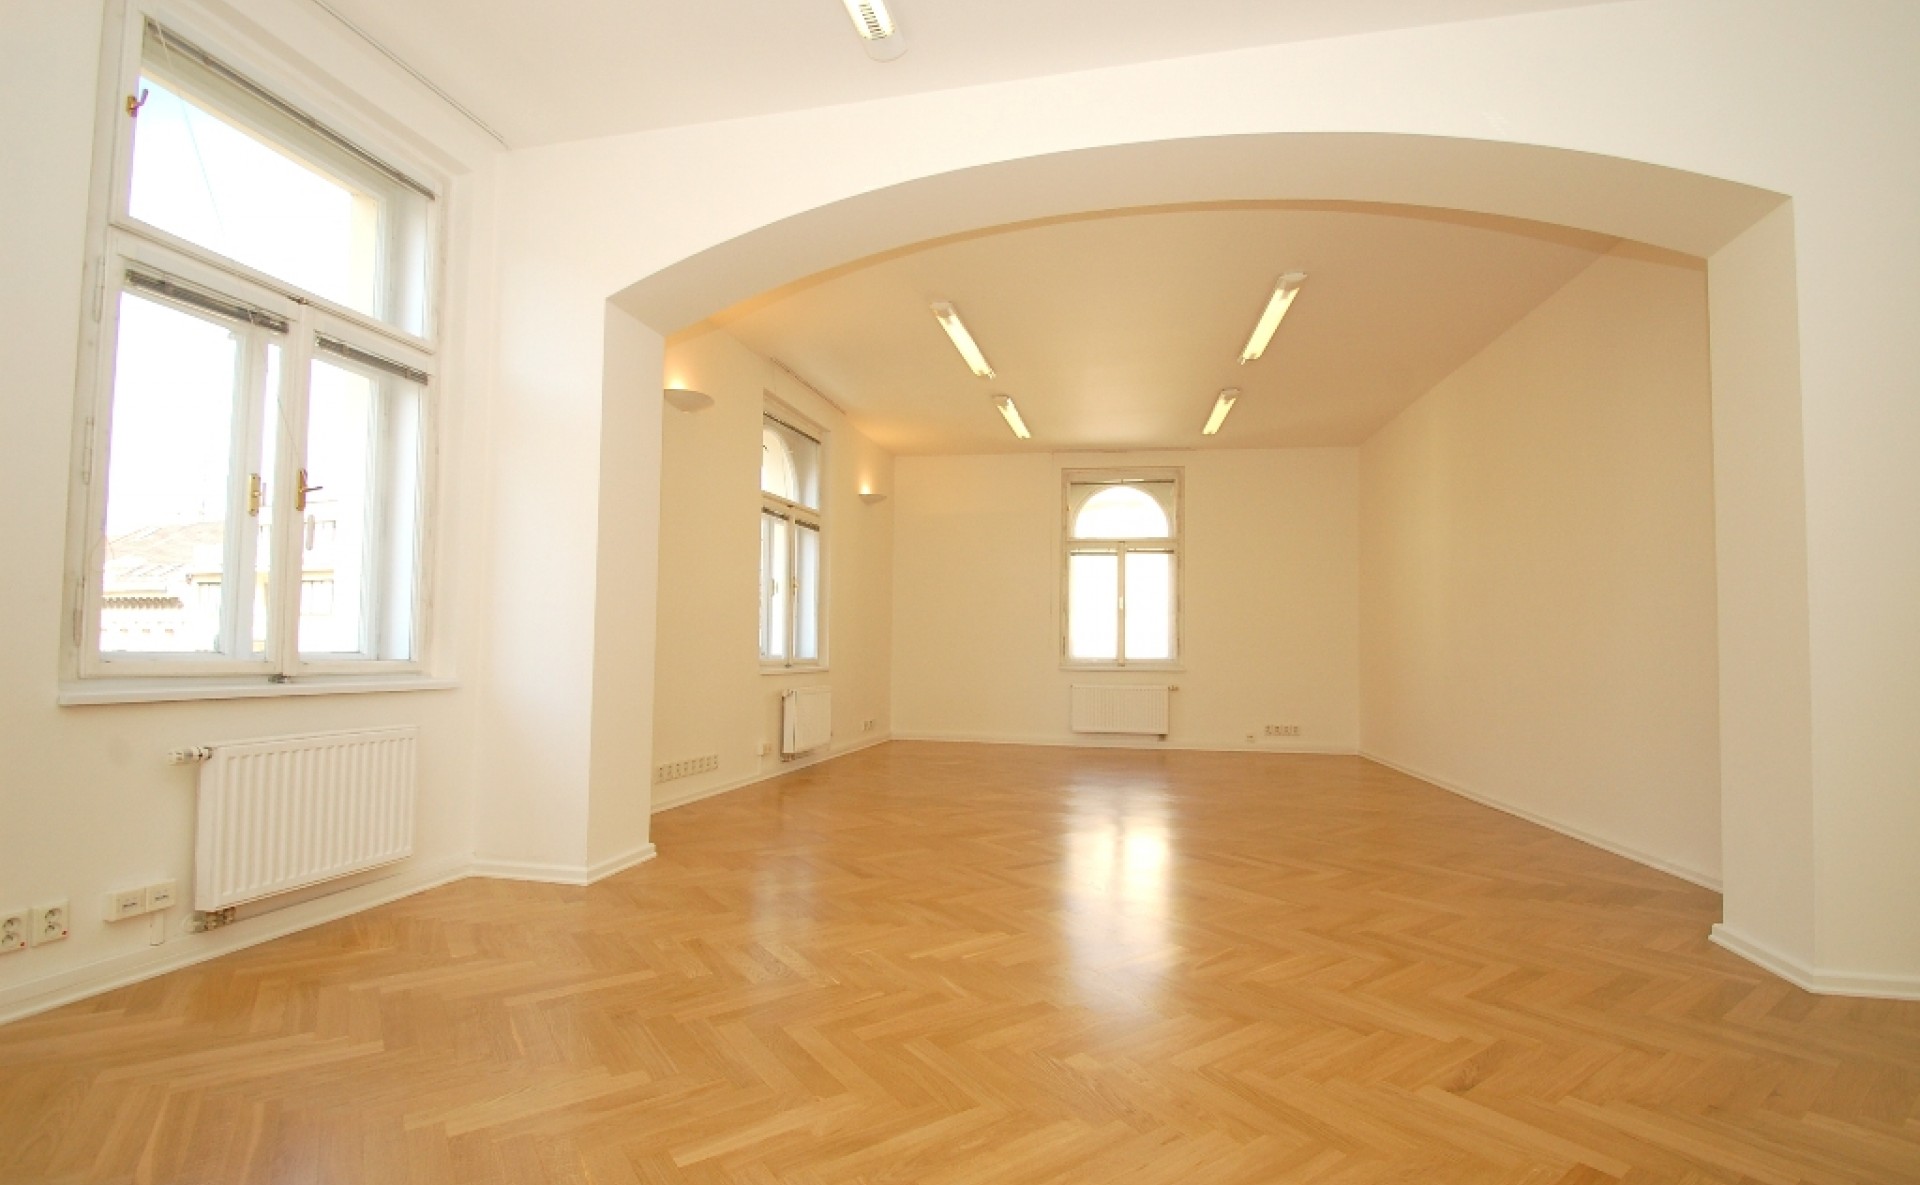 Offices for rent Prague 2